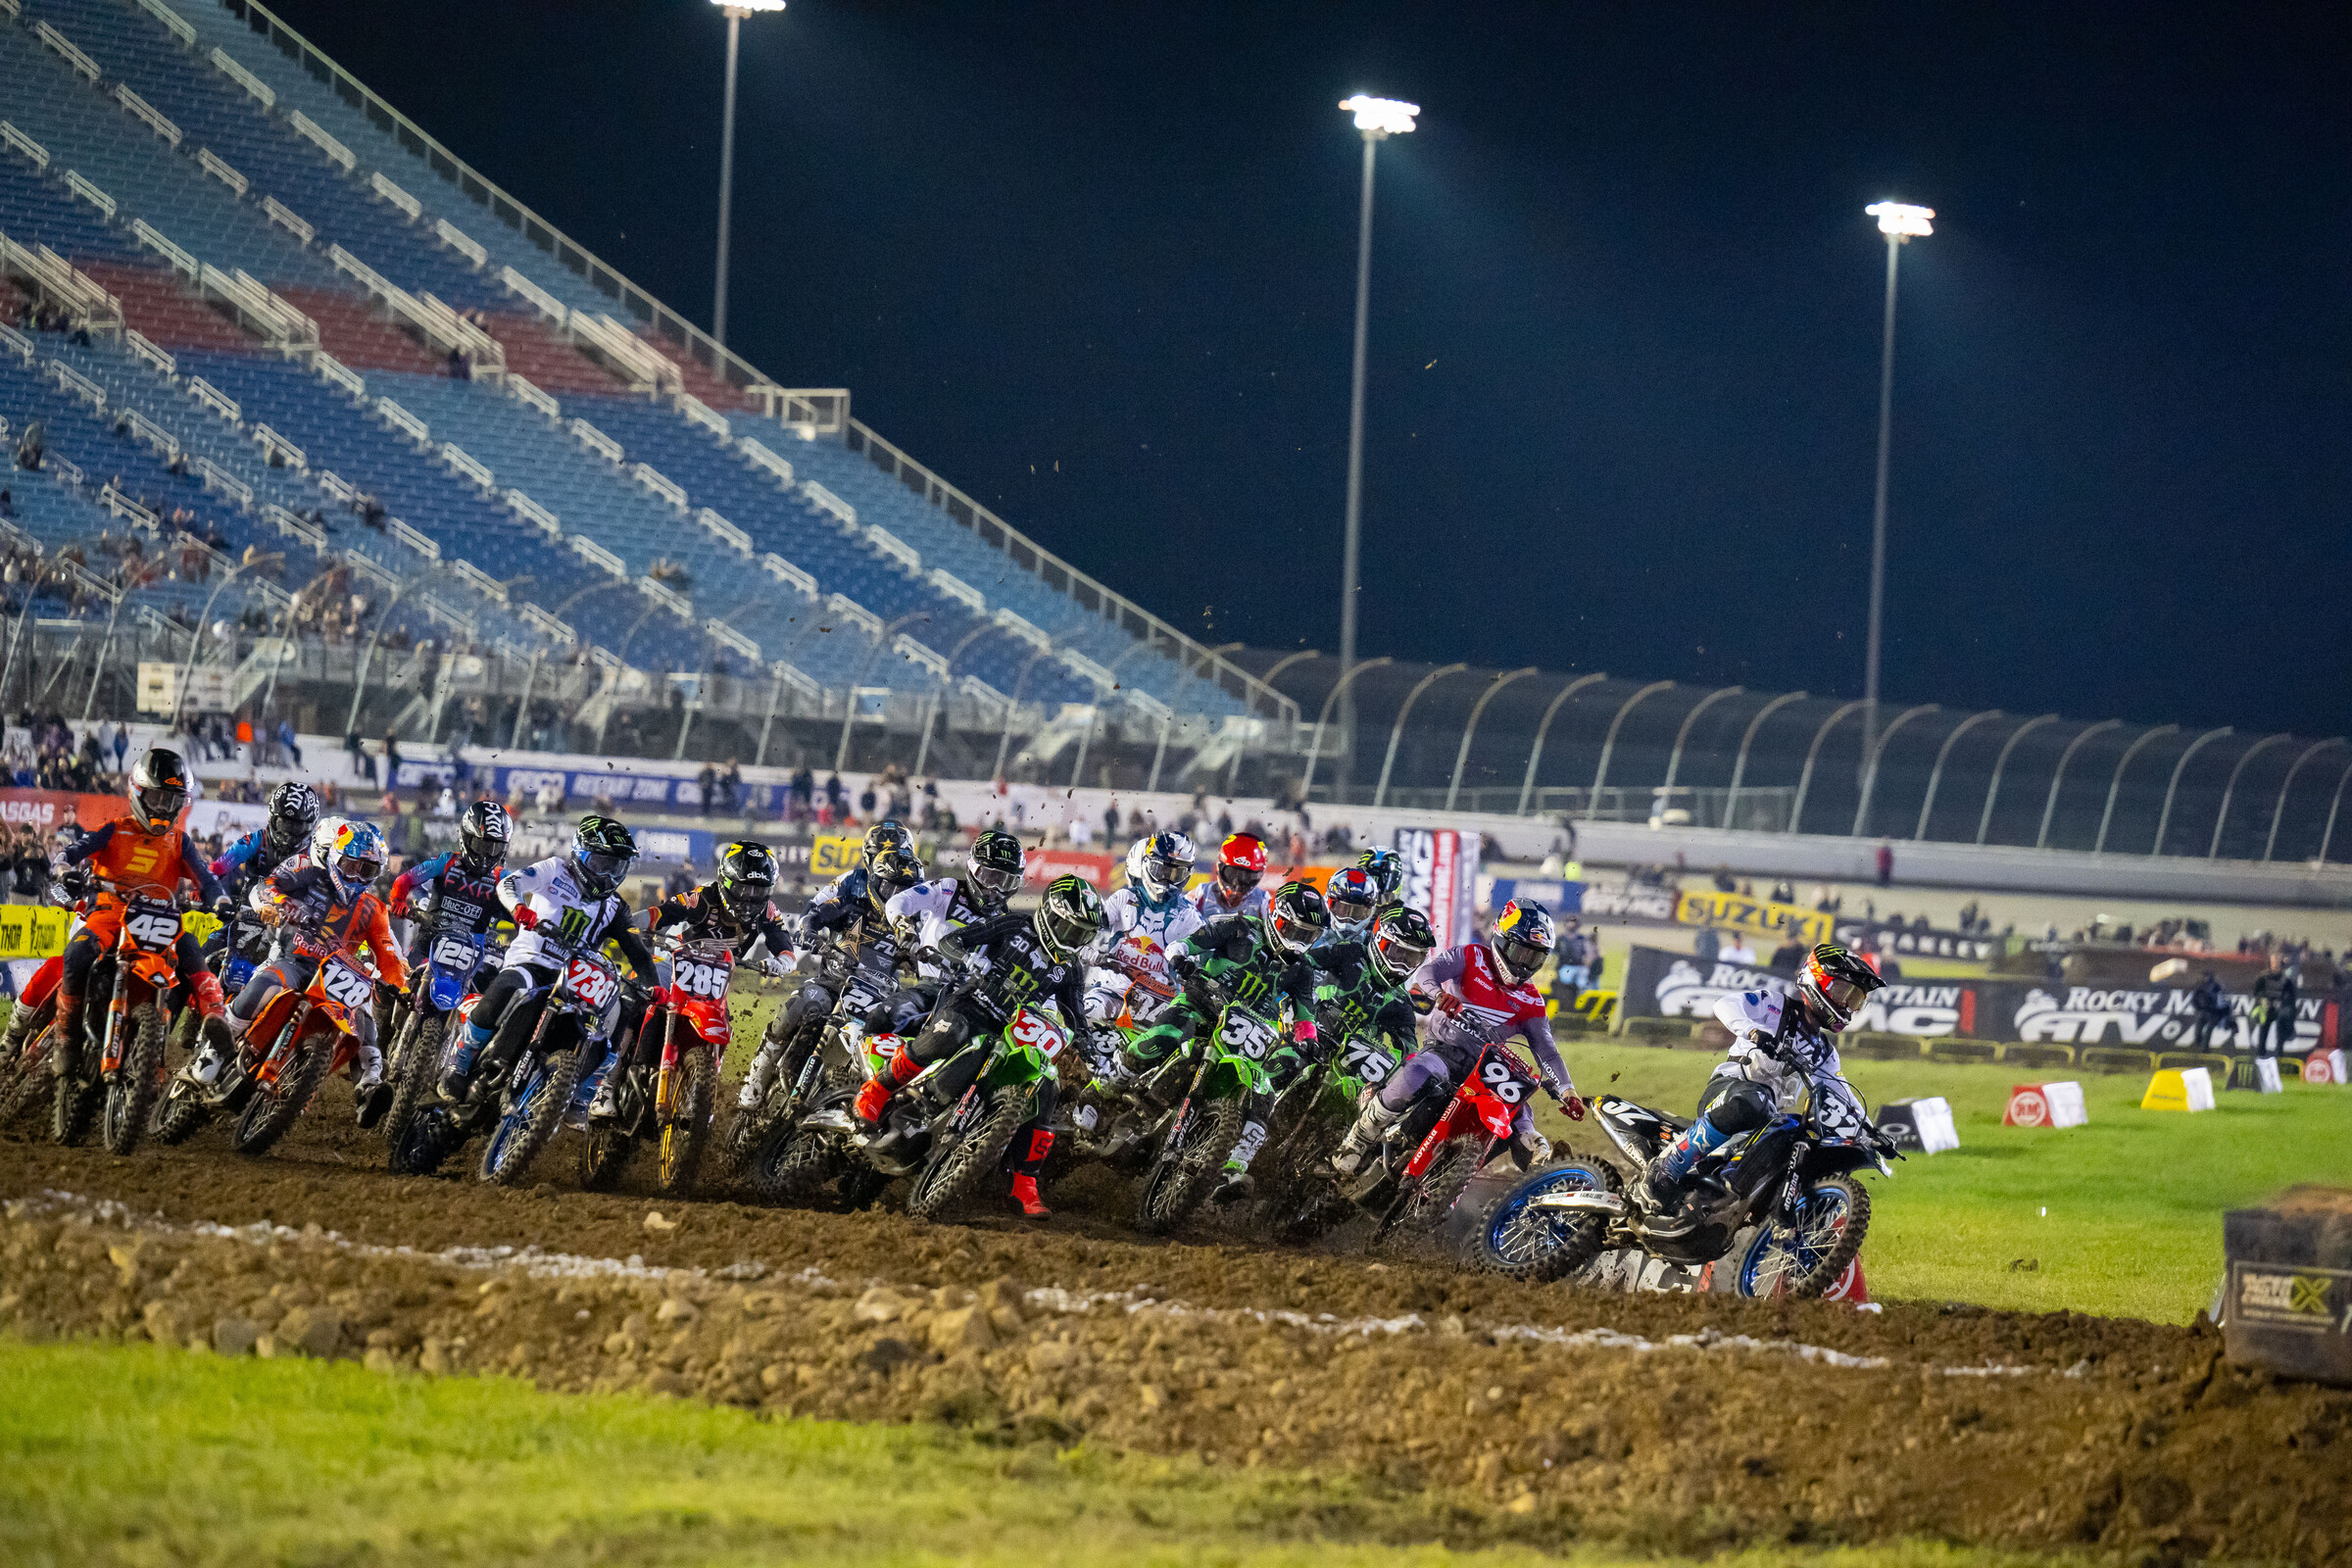 Race Report from the 2023 Chicagoland SuperMotocross World Championship